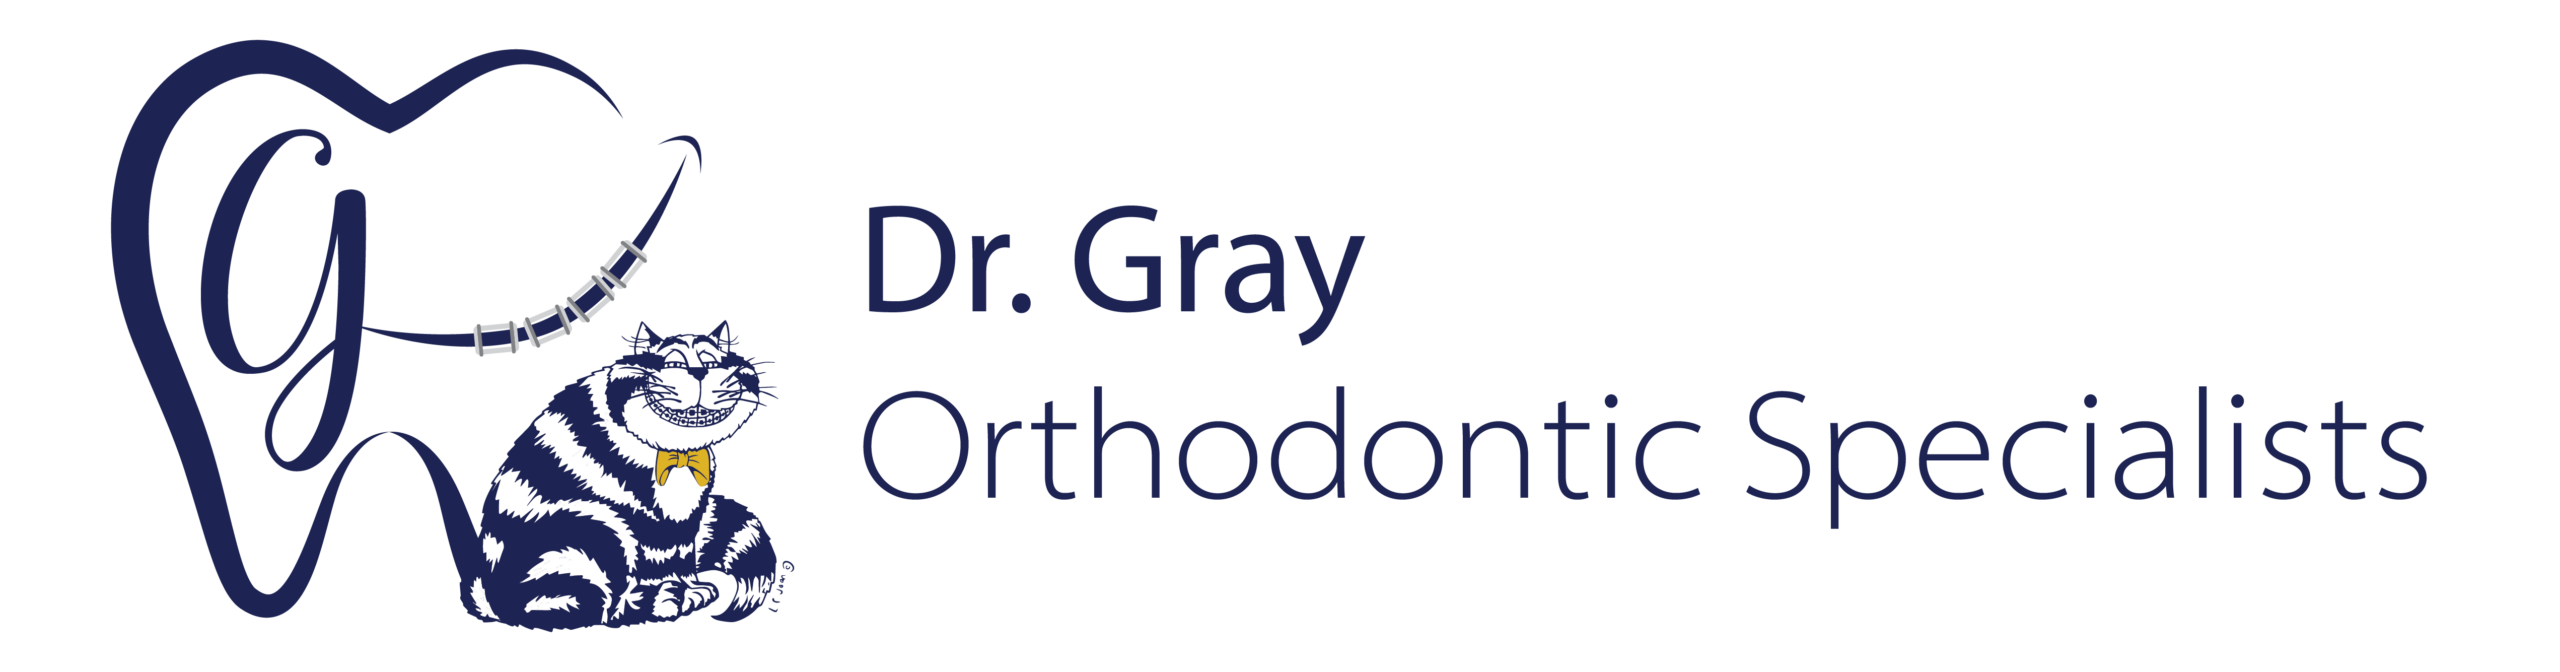 Dr. Gray Orthodontic Specialists